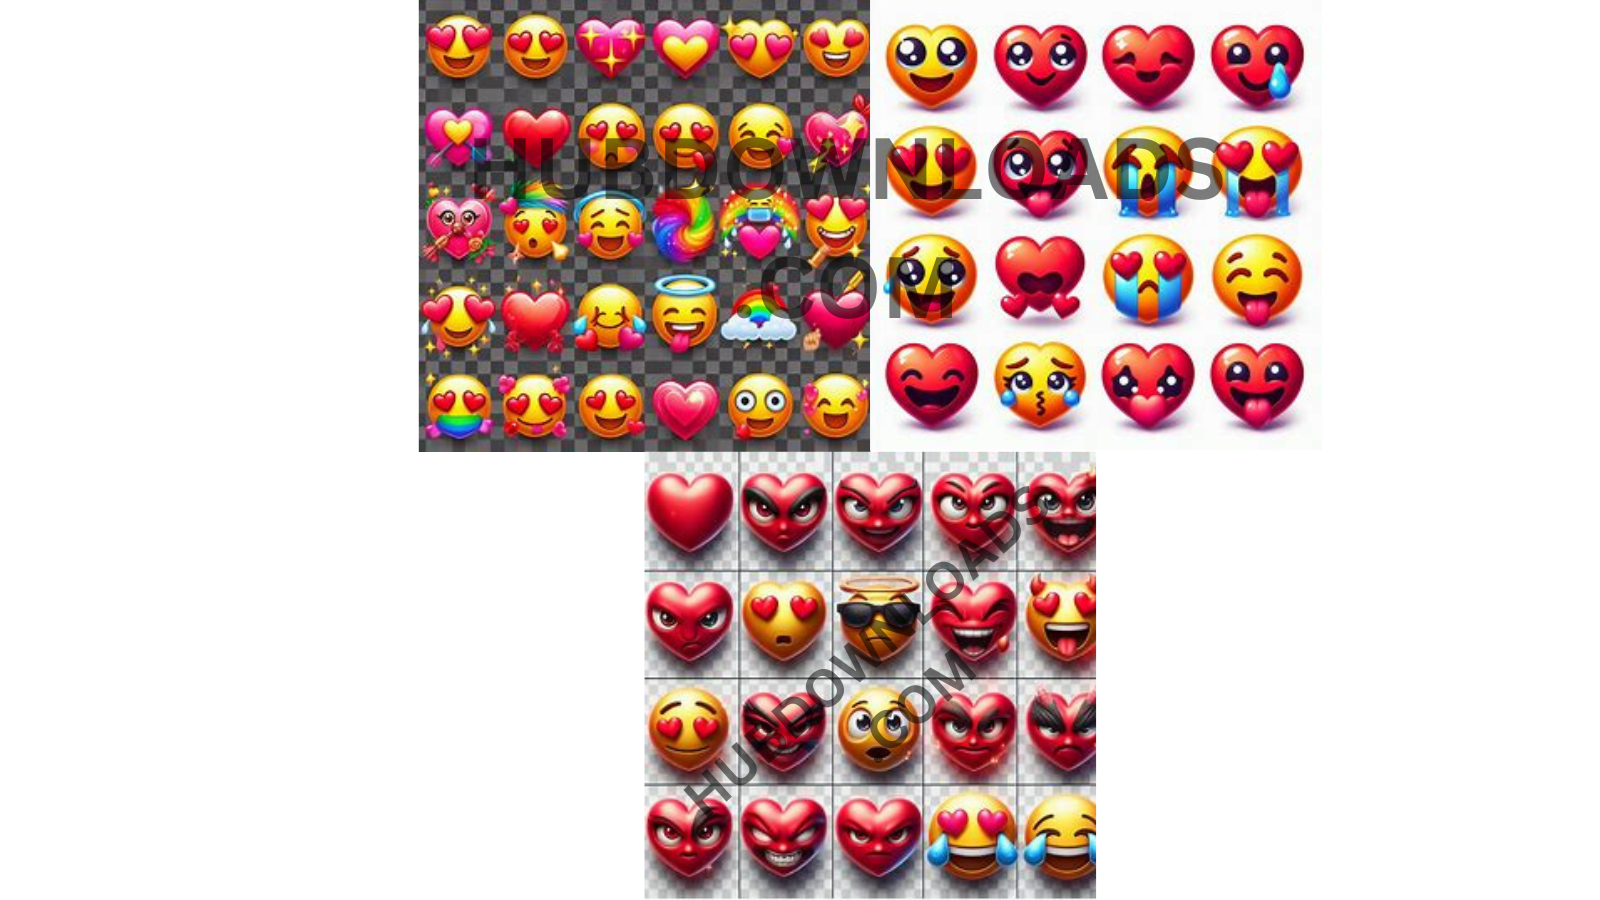 Collection of heart-shaped emoji PNGs with various expressions for digital design and social media.